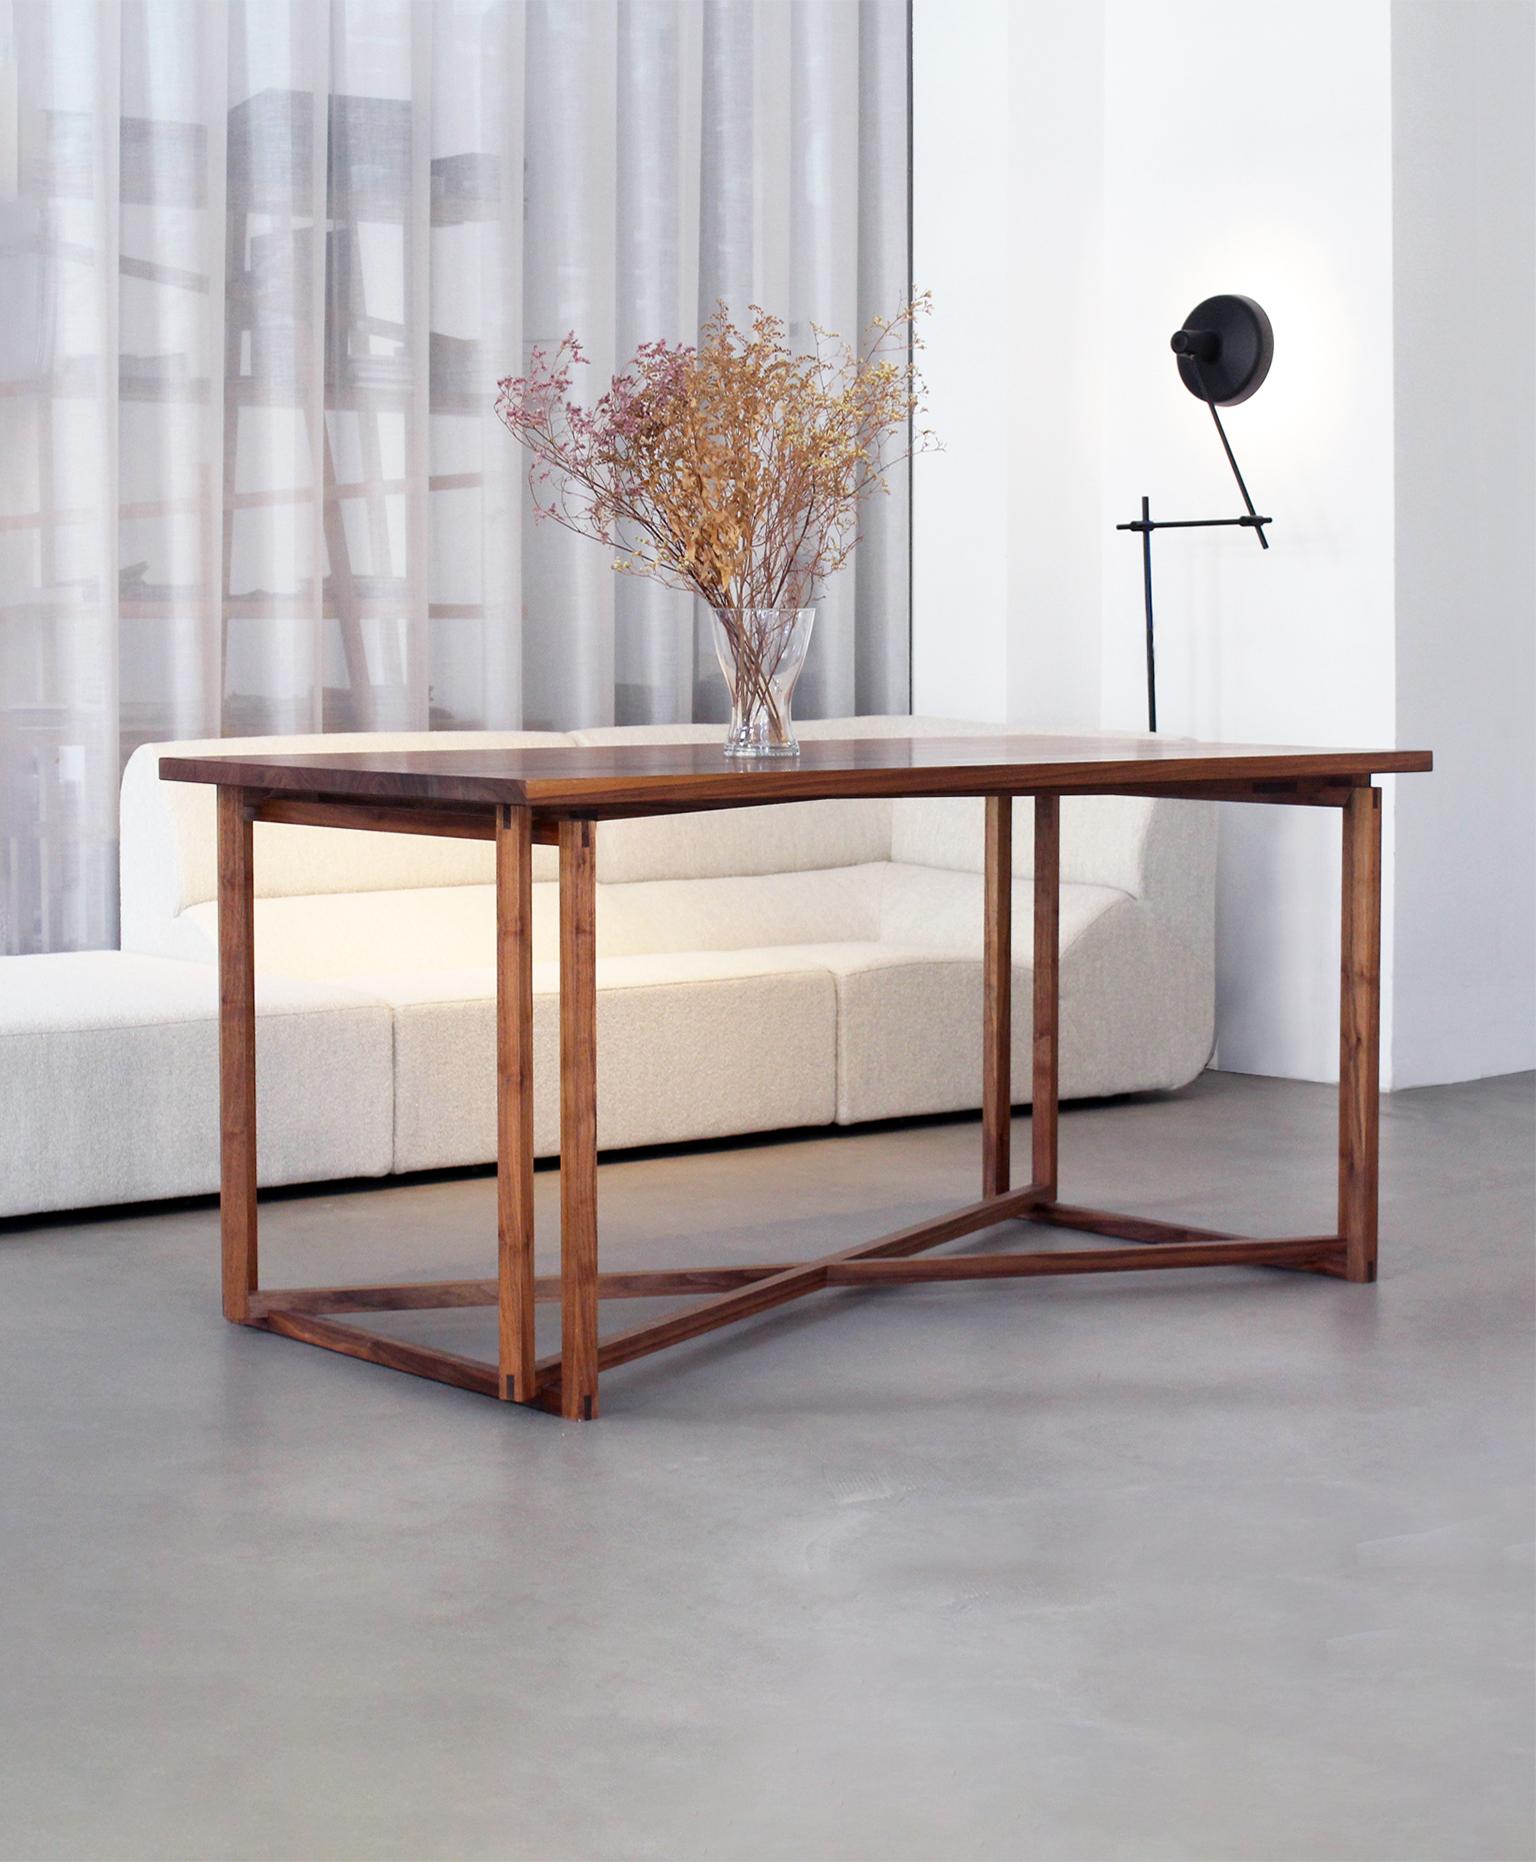 Hand-Crafted Unique Hand Crafted Table in Solid Walnut Wood by Laura Maasry, Berlin, 2020 For Sale